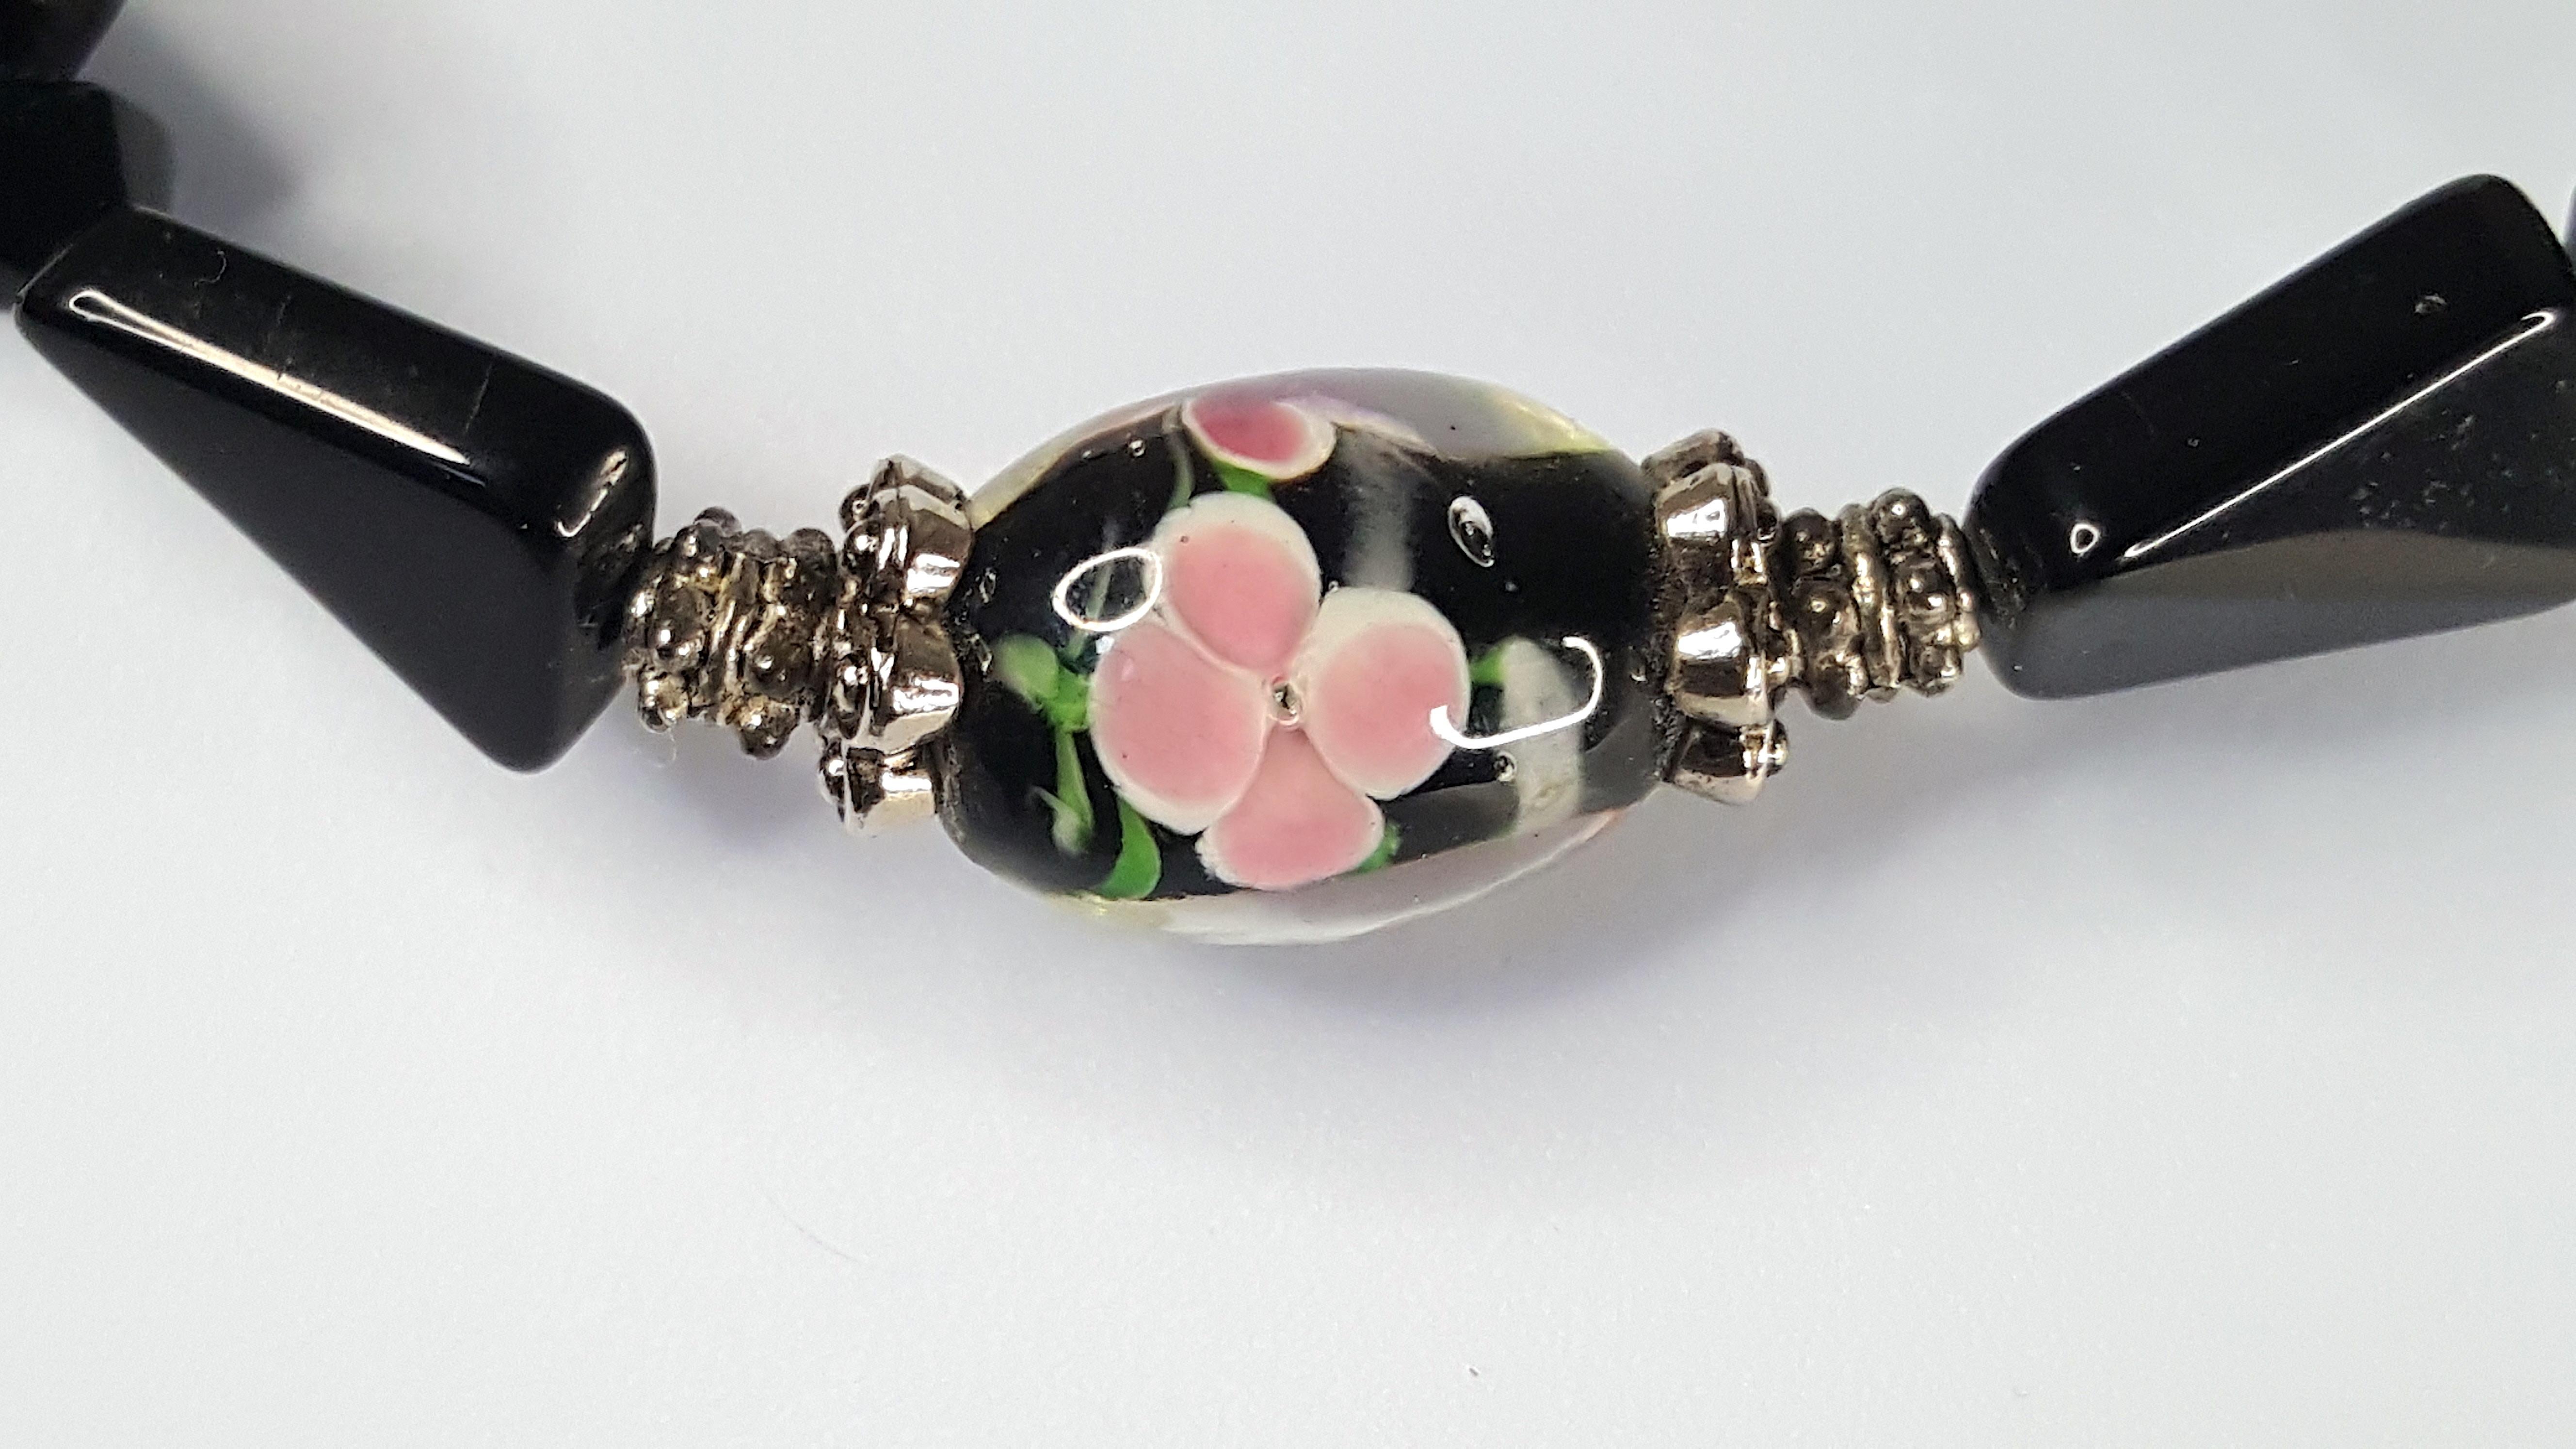 With a distinct silver twisted toggle clasp and multiple kinds of nubby rondelles dating to the late 1920s, Parisian parurier Louis Rousselet's workshop handcrafted this glass beaded necklace featuring cased floral lampwork capped by a mix of silver